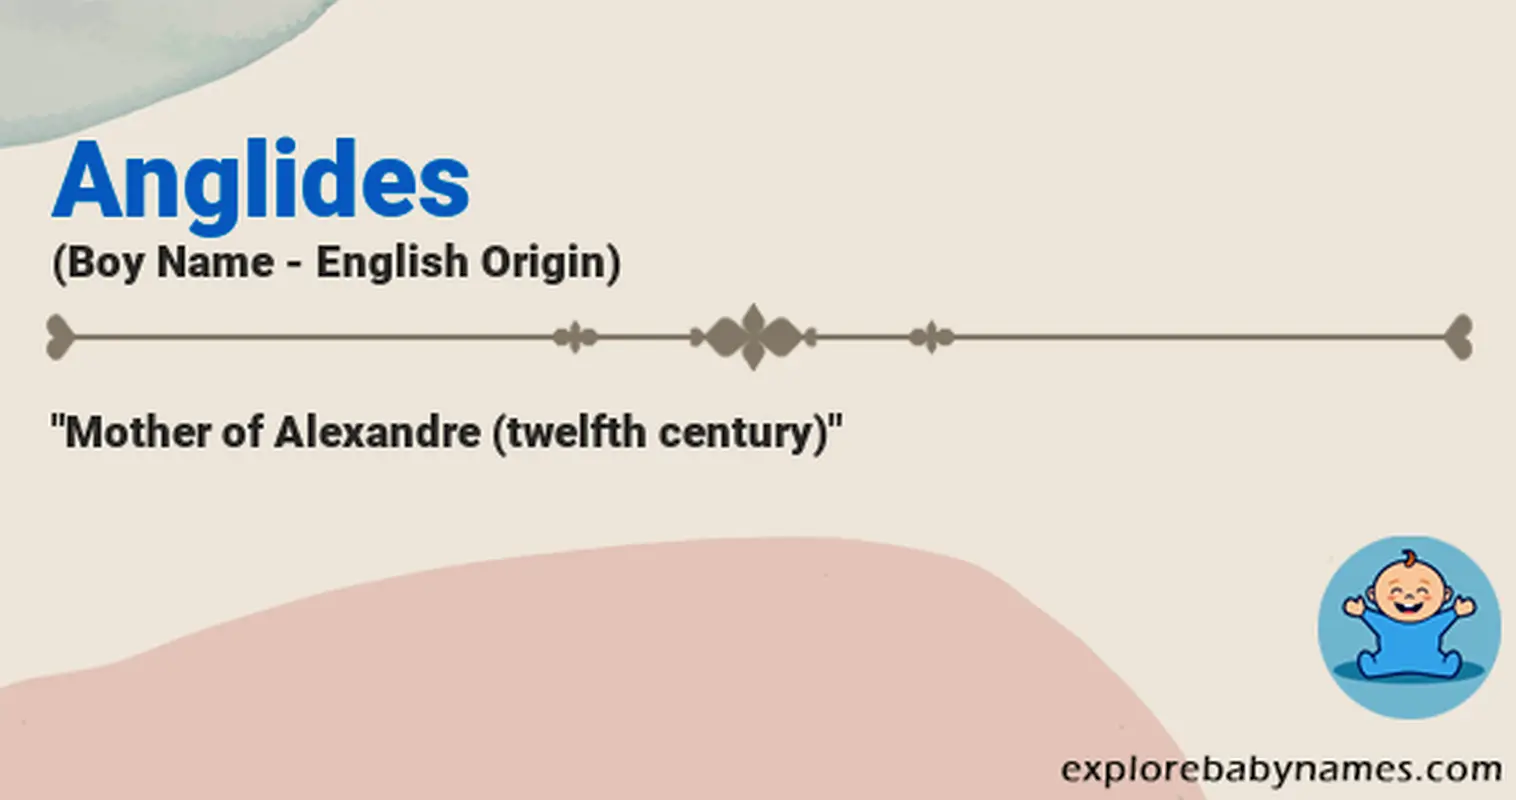 Meaning of Anglides